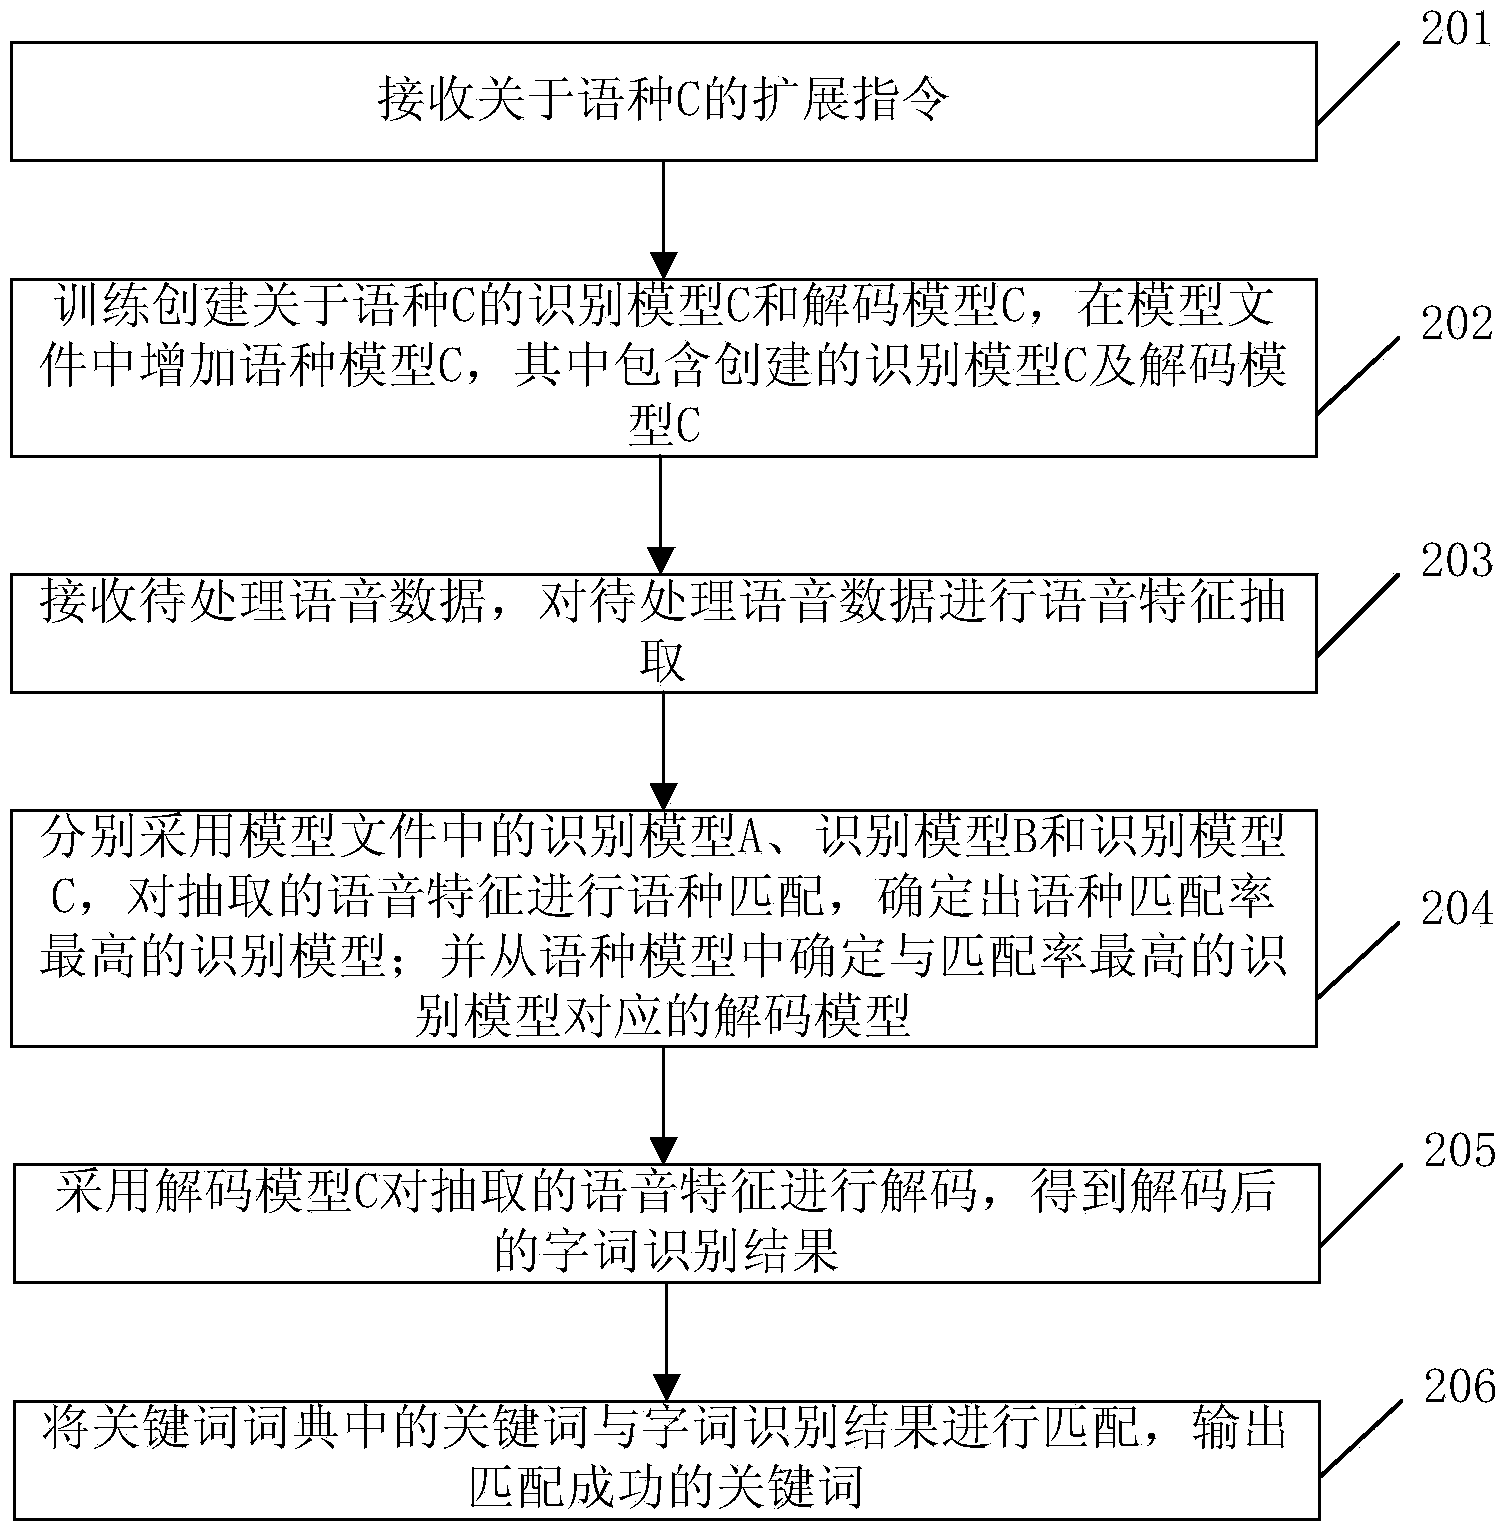 Method and device for conducting voice keyword search